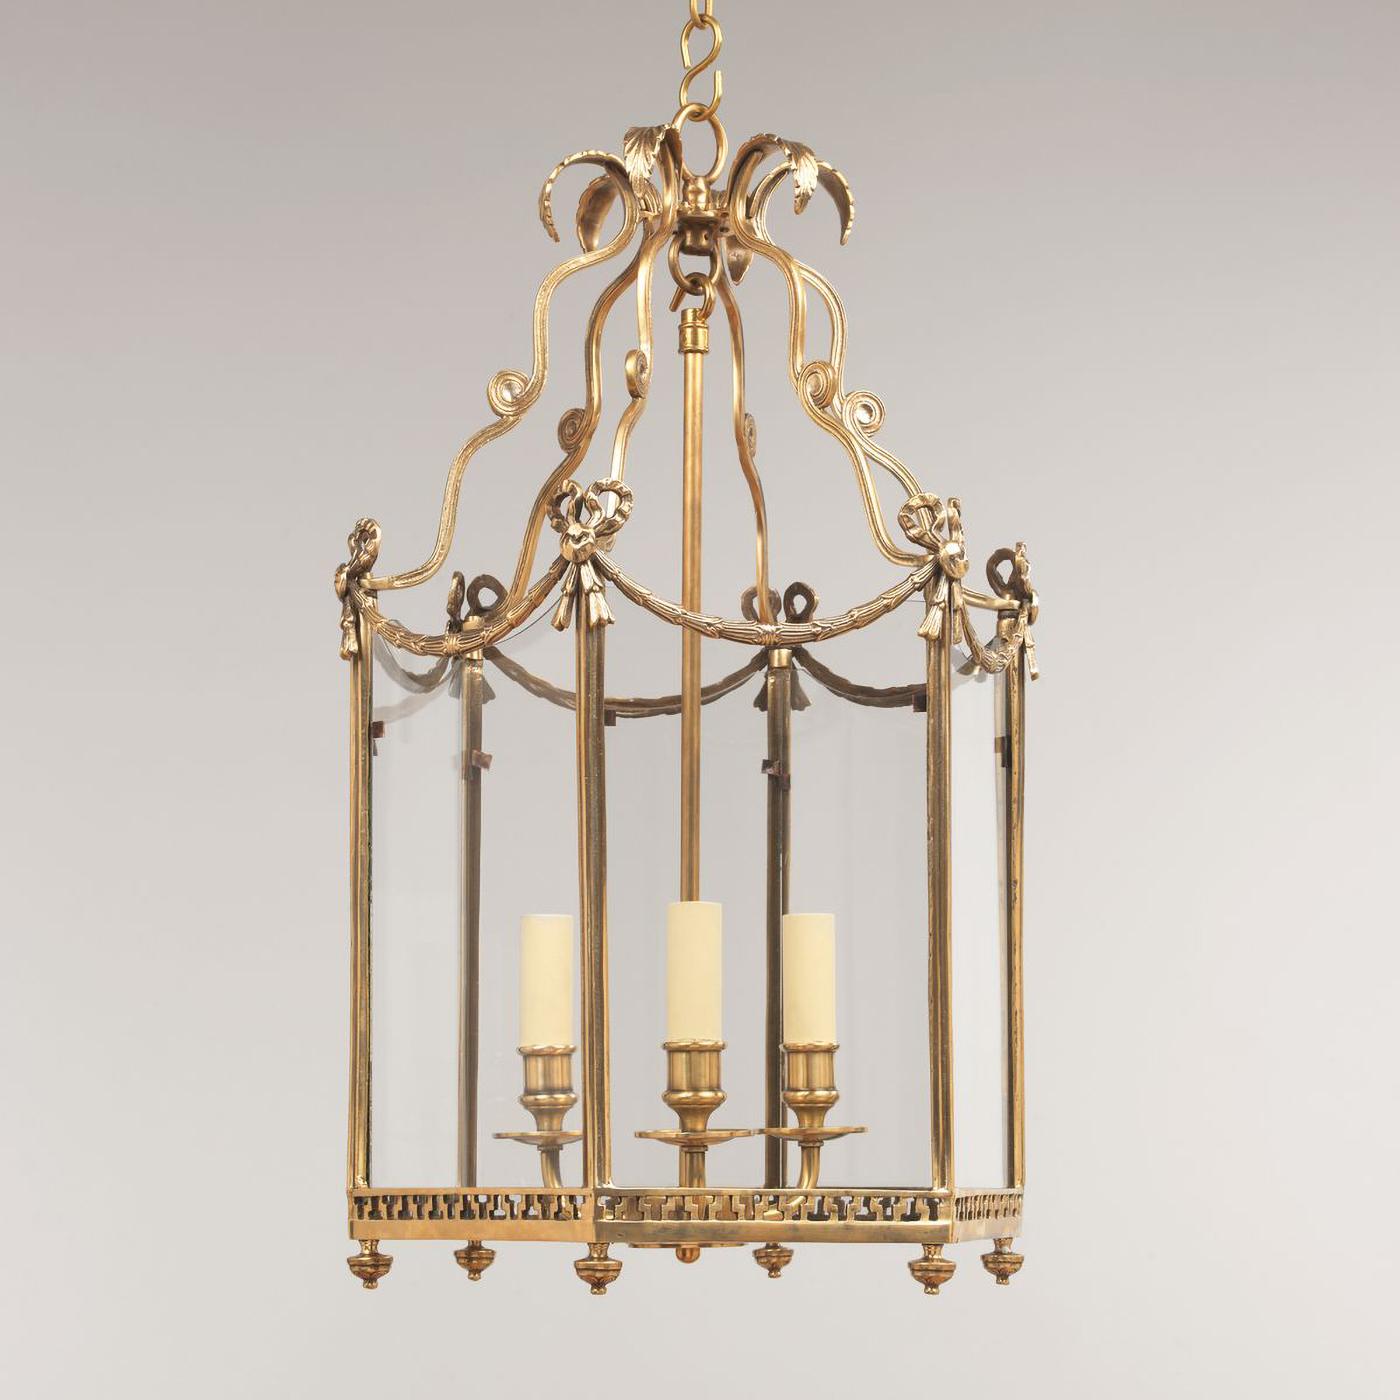 A small Swedish Neo-Classic style five-light brass hall lantern with 18th-century style embellishments. The leaf tip crown above scrolling supports and a hexagonal frame decorated with bowknots, tassels, and bellflower swags. The base is decorated